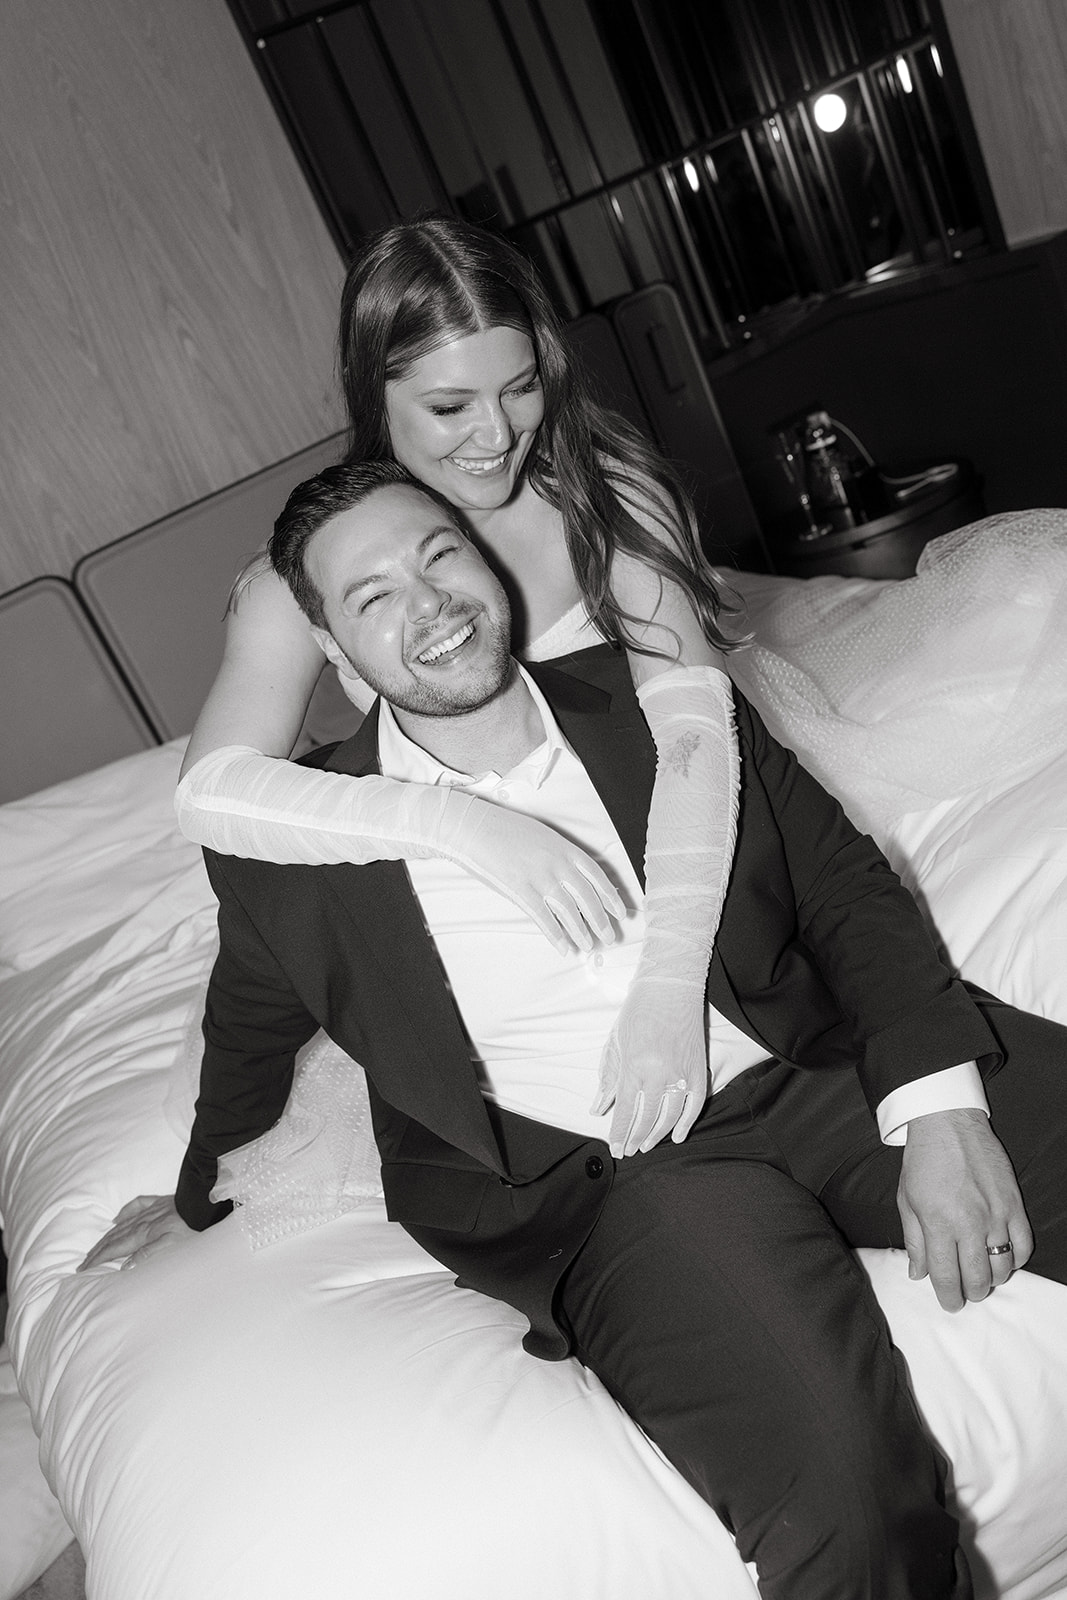 A couple who eloped in NYC sit on a hotel bed and laugh together